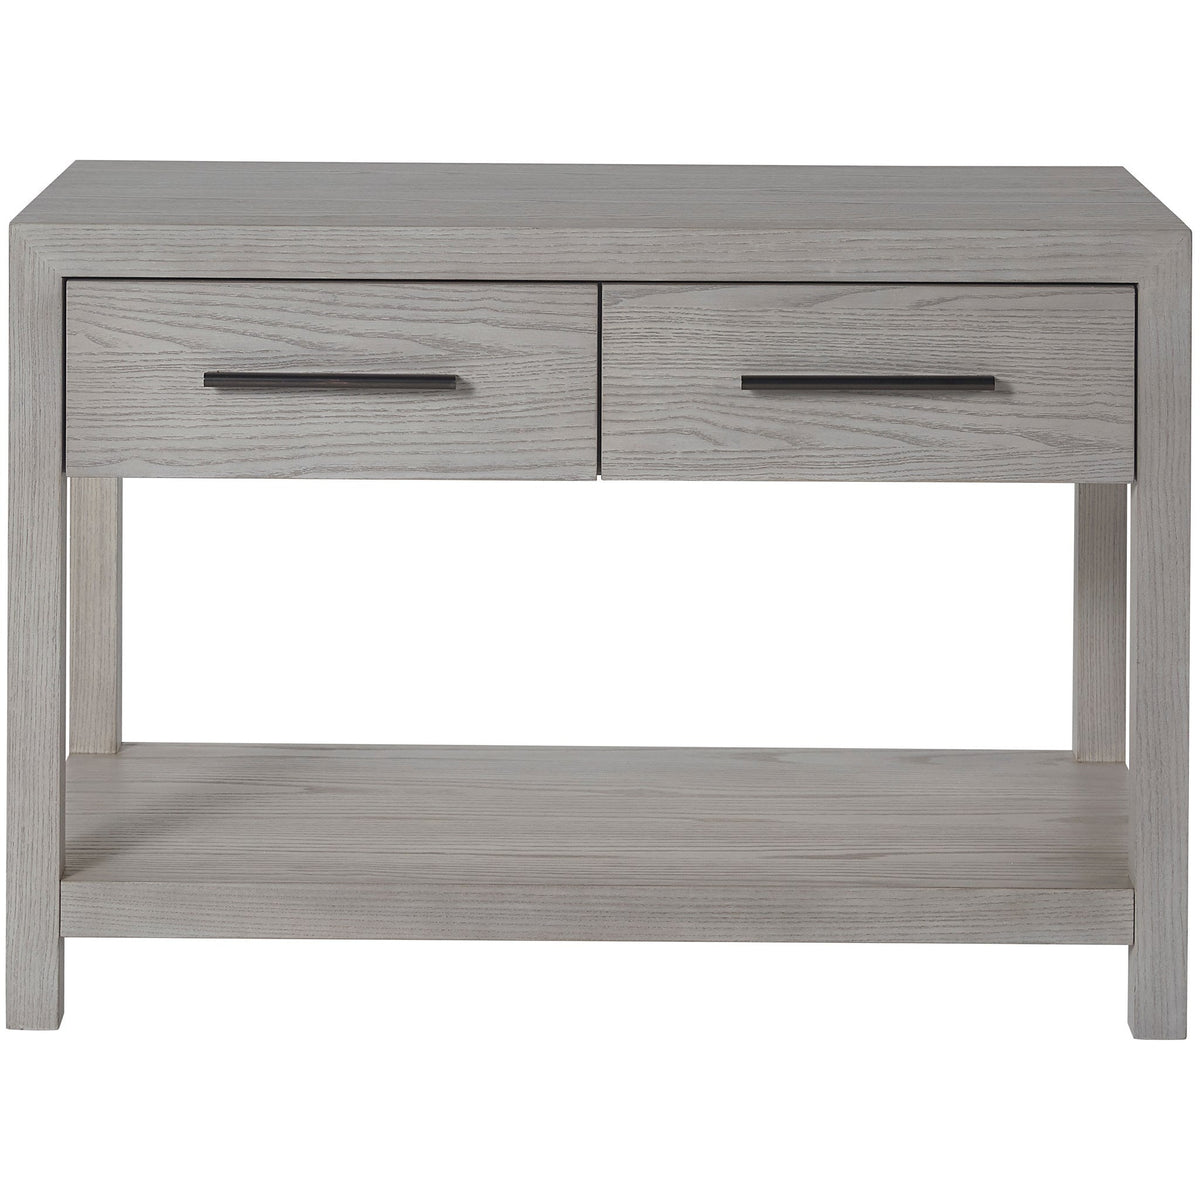 Two Drawer Nightstand - Be Bold Furniture